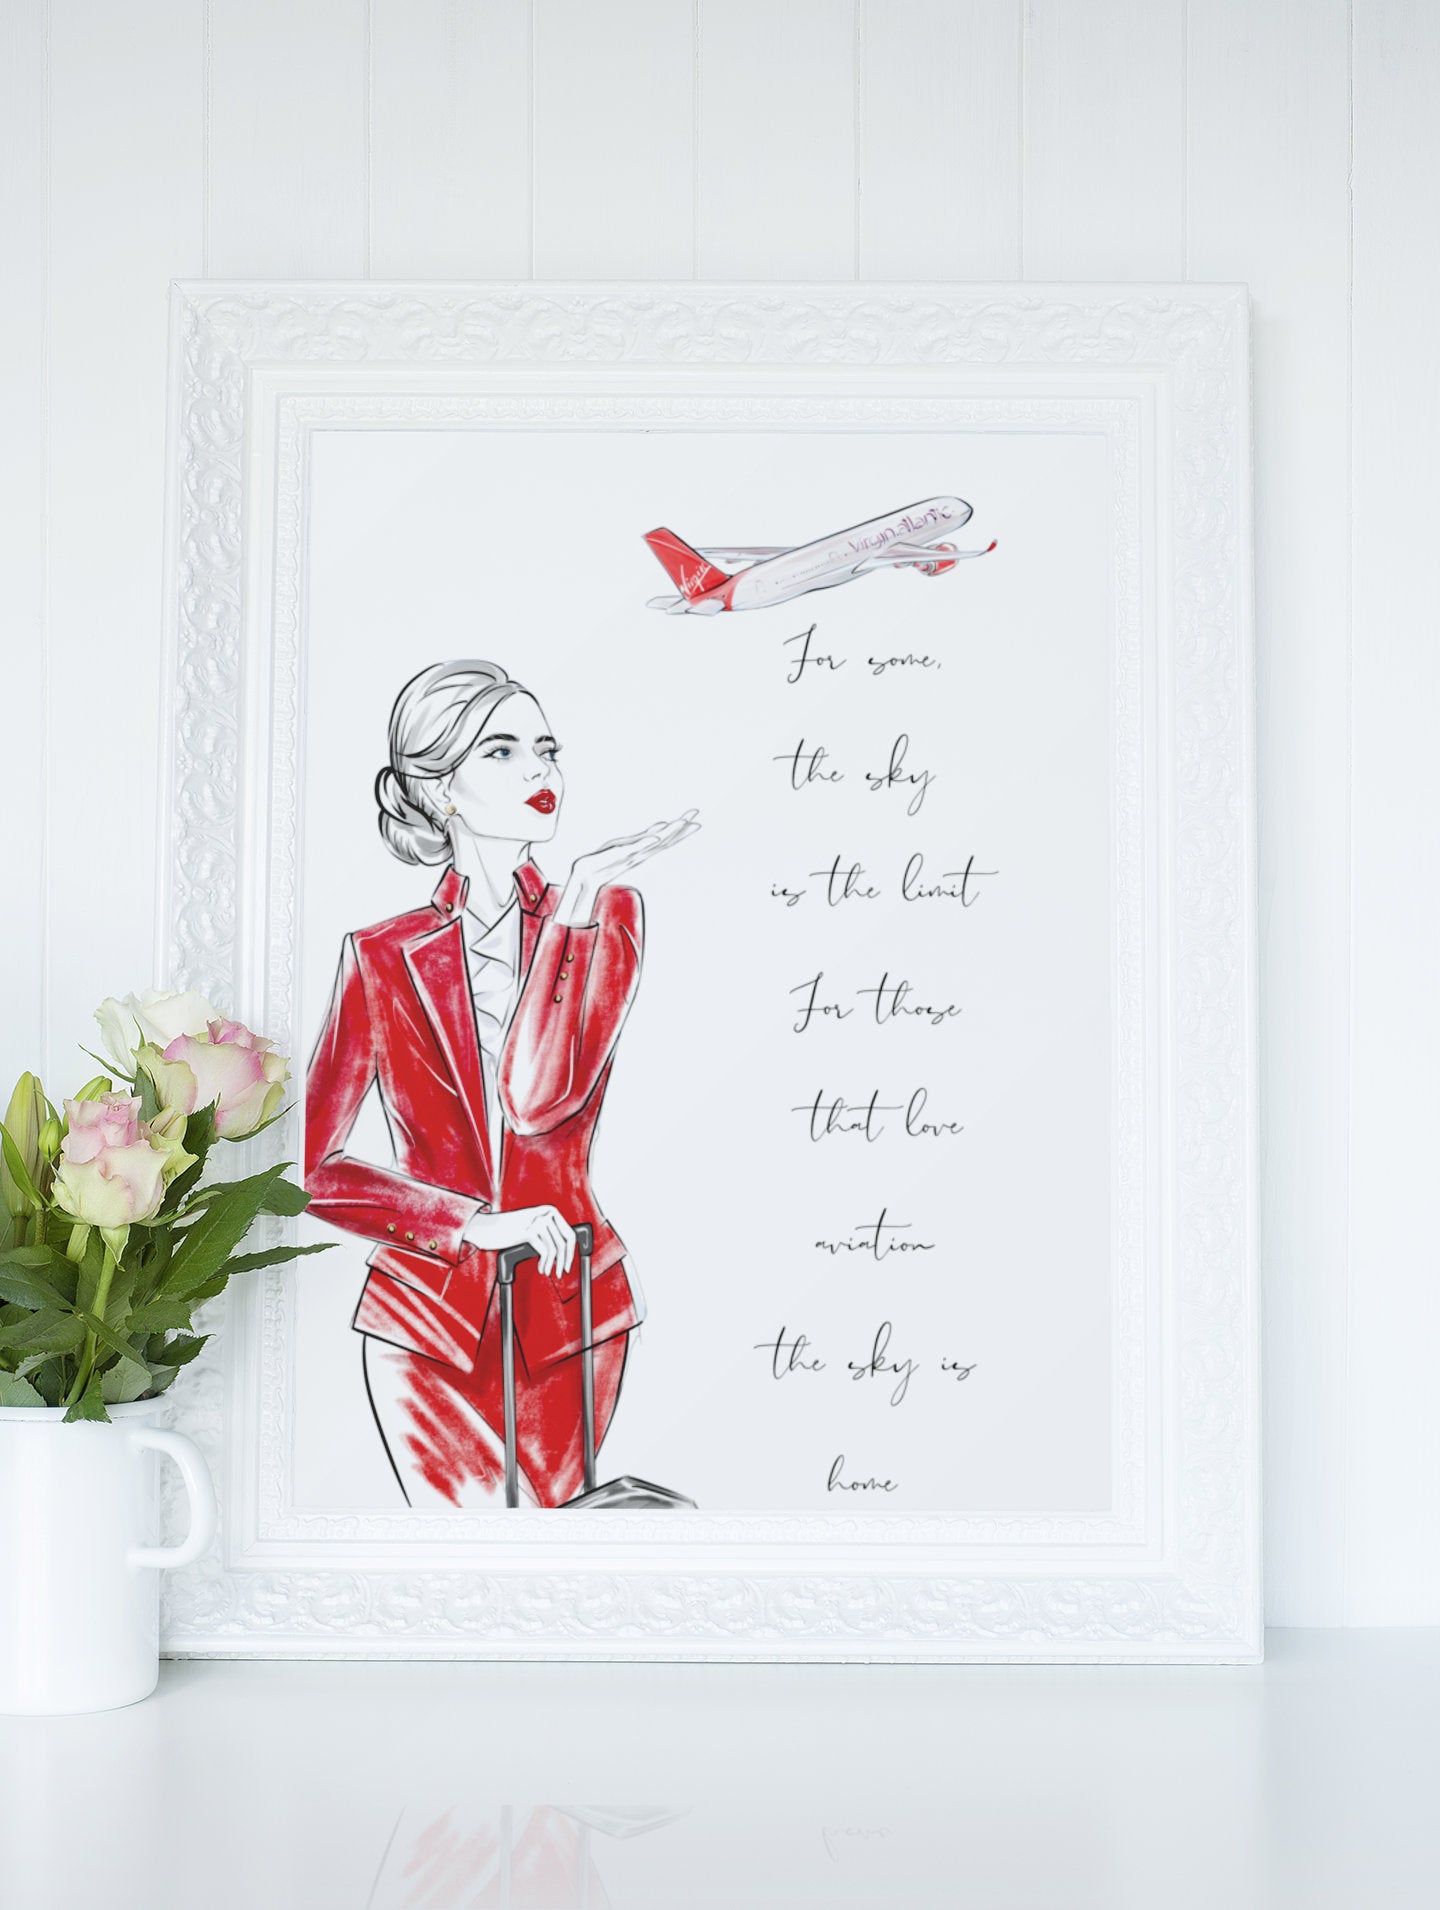 Virgin Atlantic Cabin Crew Print | 'For most, the sky is the limit, for those that love aviation, the sky is home' | Aviation Quote Print